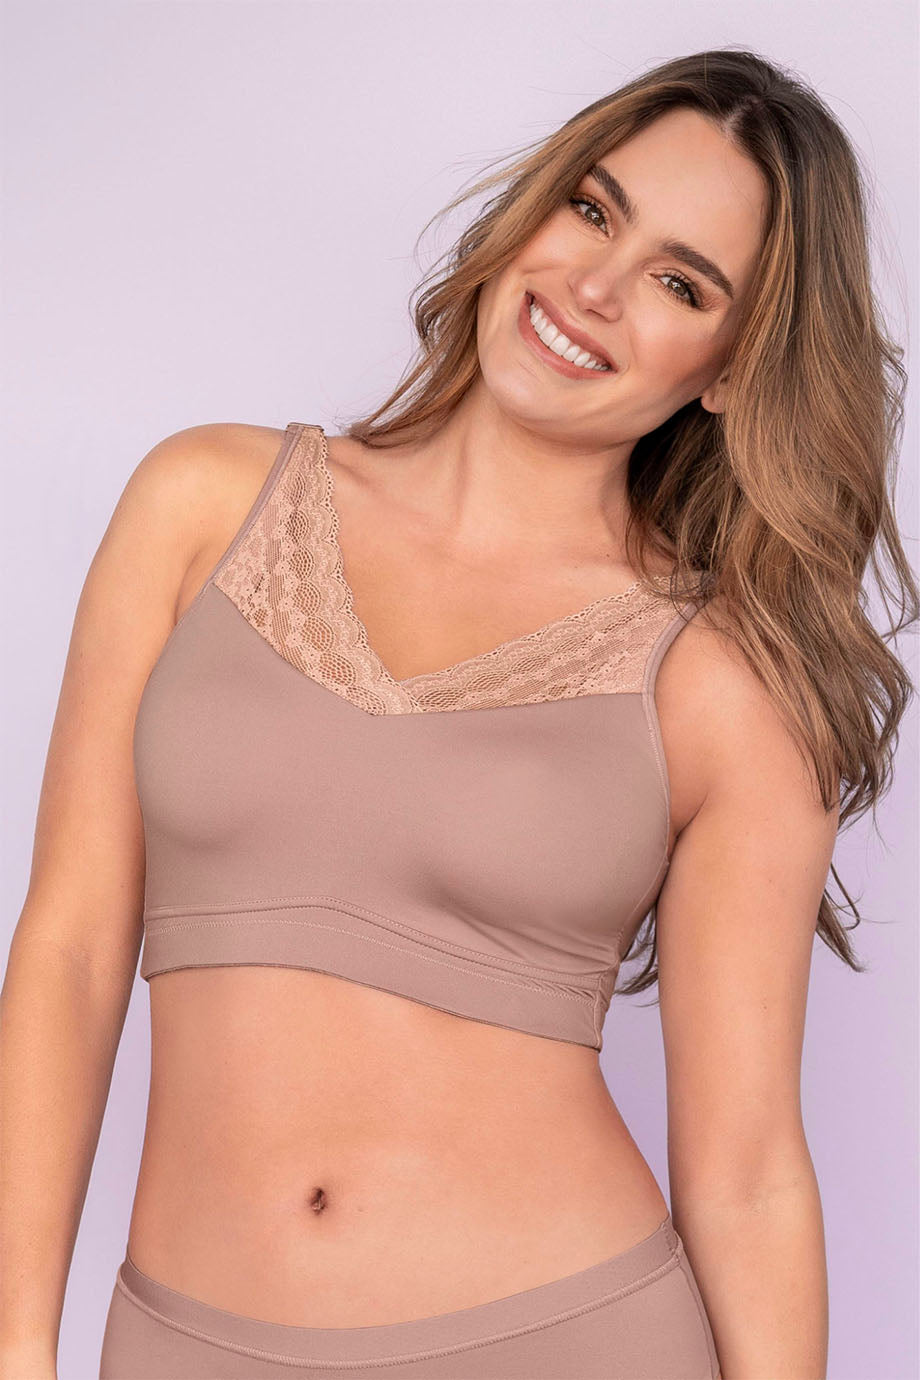 How to Choose the Best Mastectomy Sports Bras for Work Out